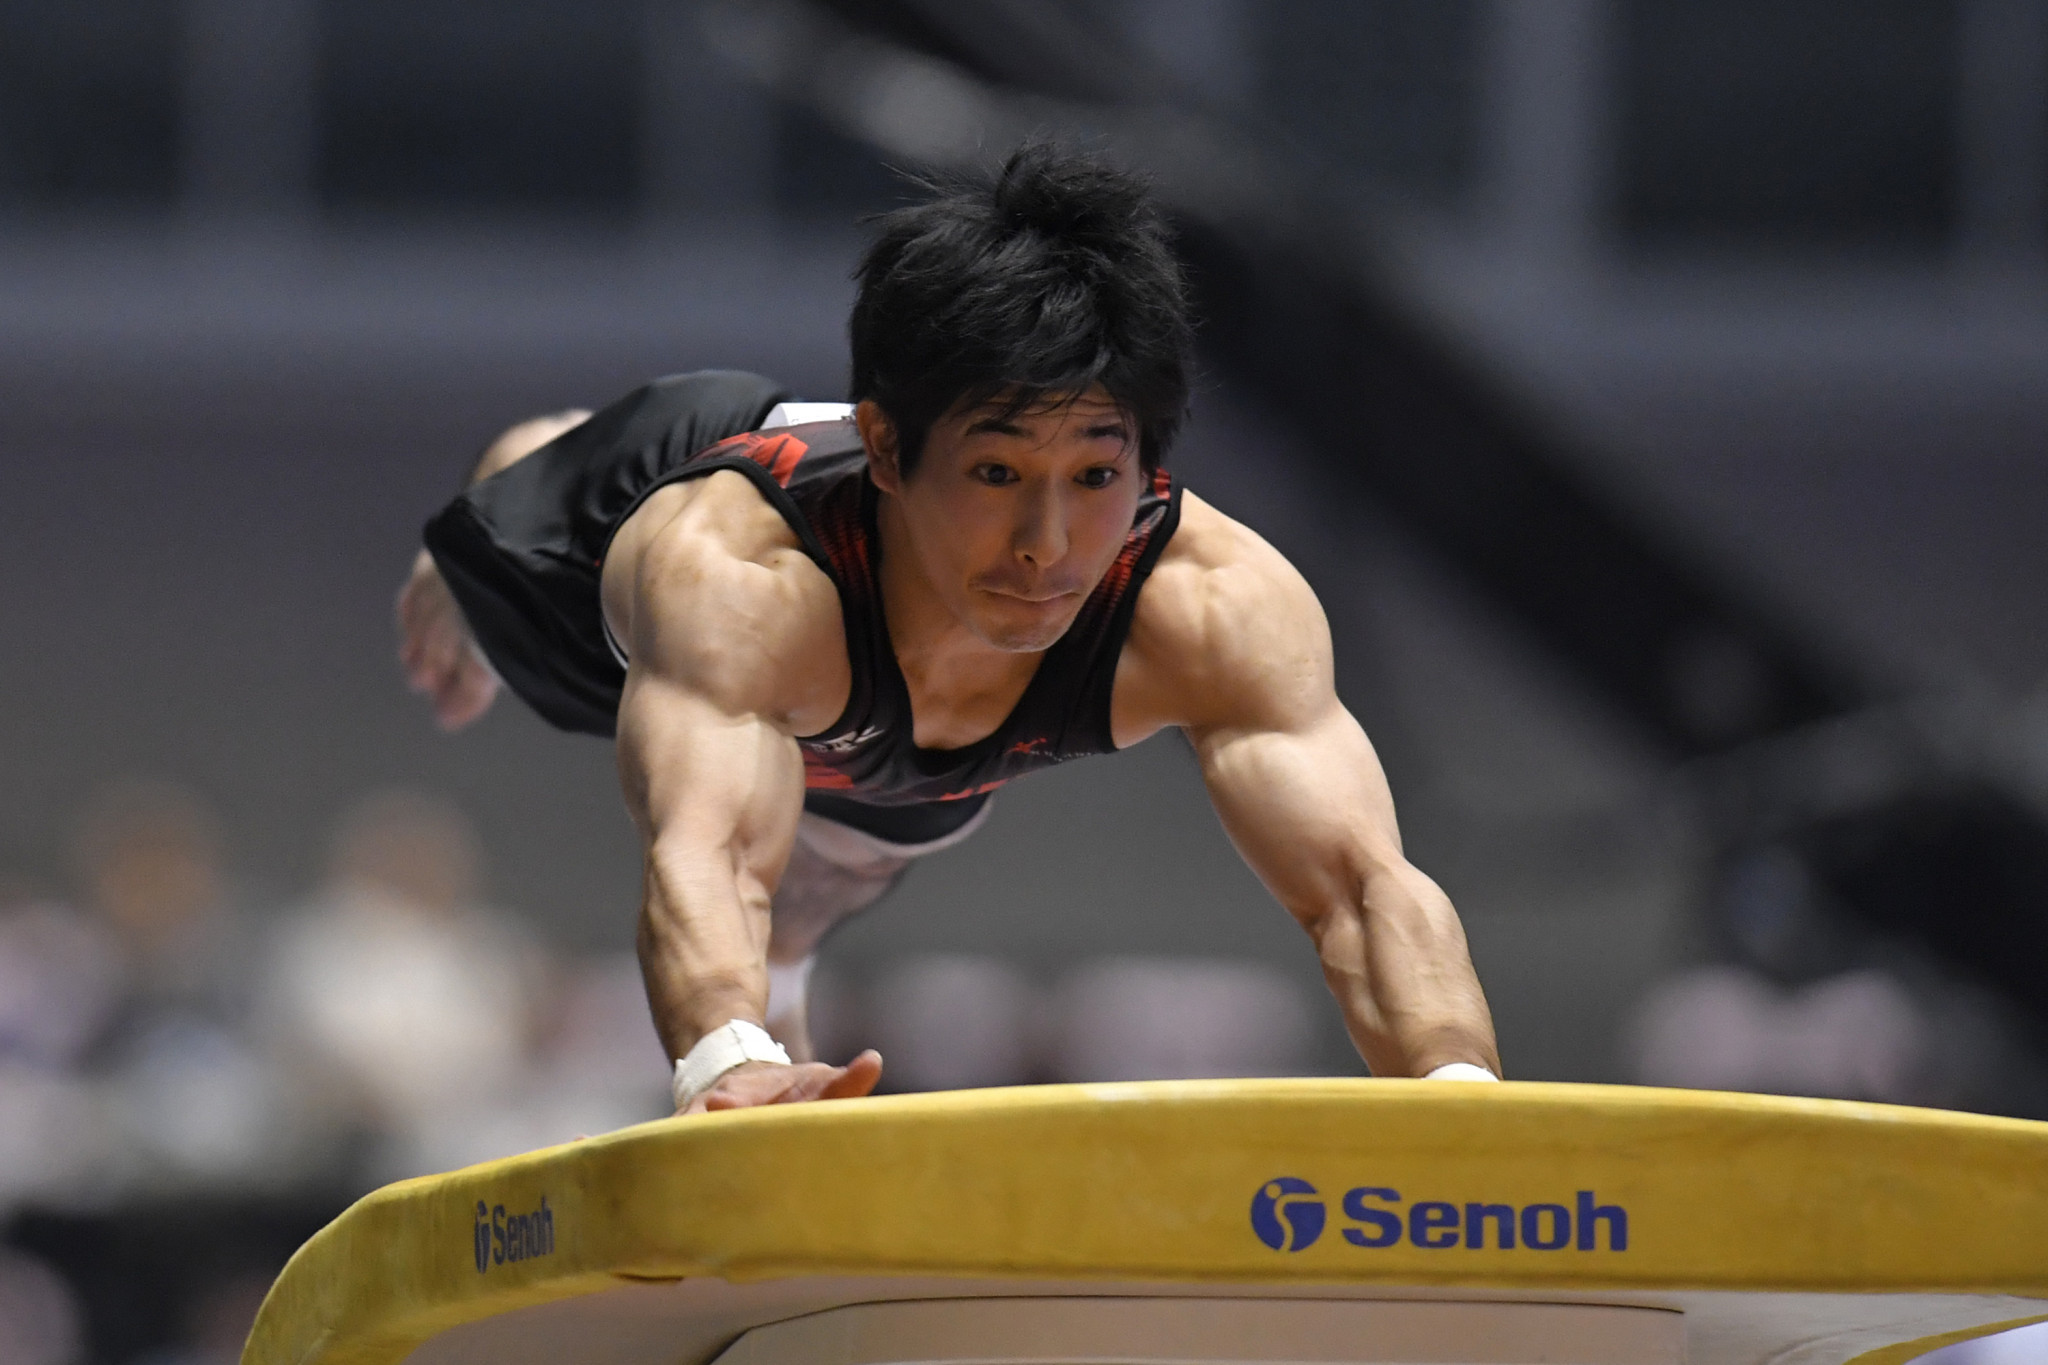 Japan’s Keisuke Asato won the men's vault event at the opening FIG Individual Apparatus World Cup in Cottbus ©Getty Images
